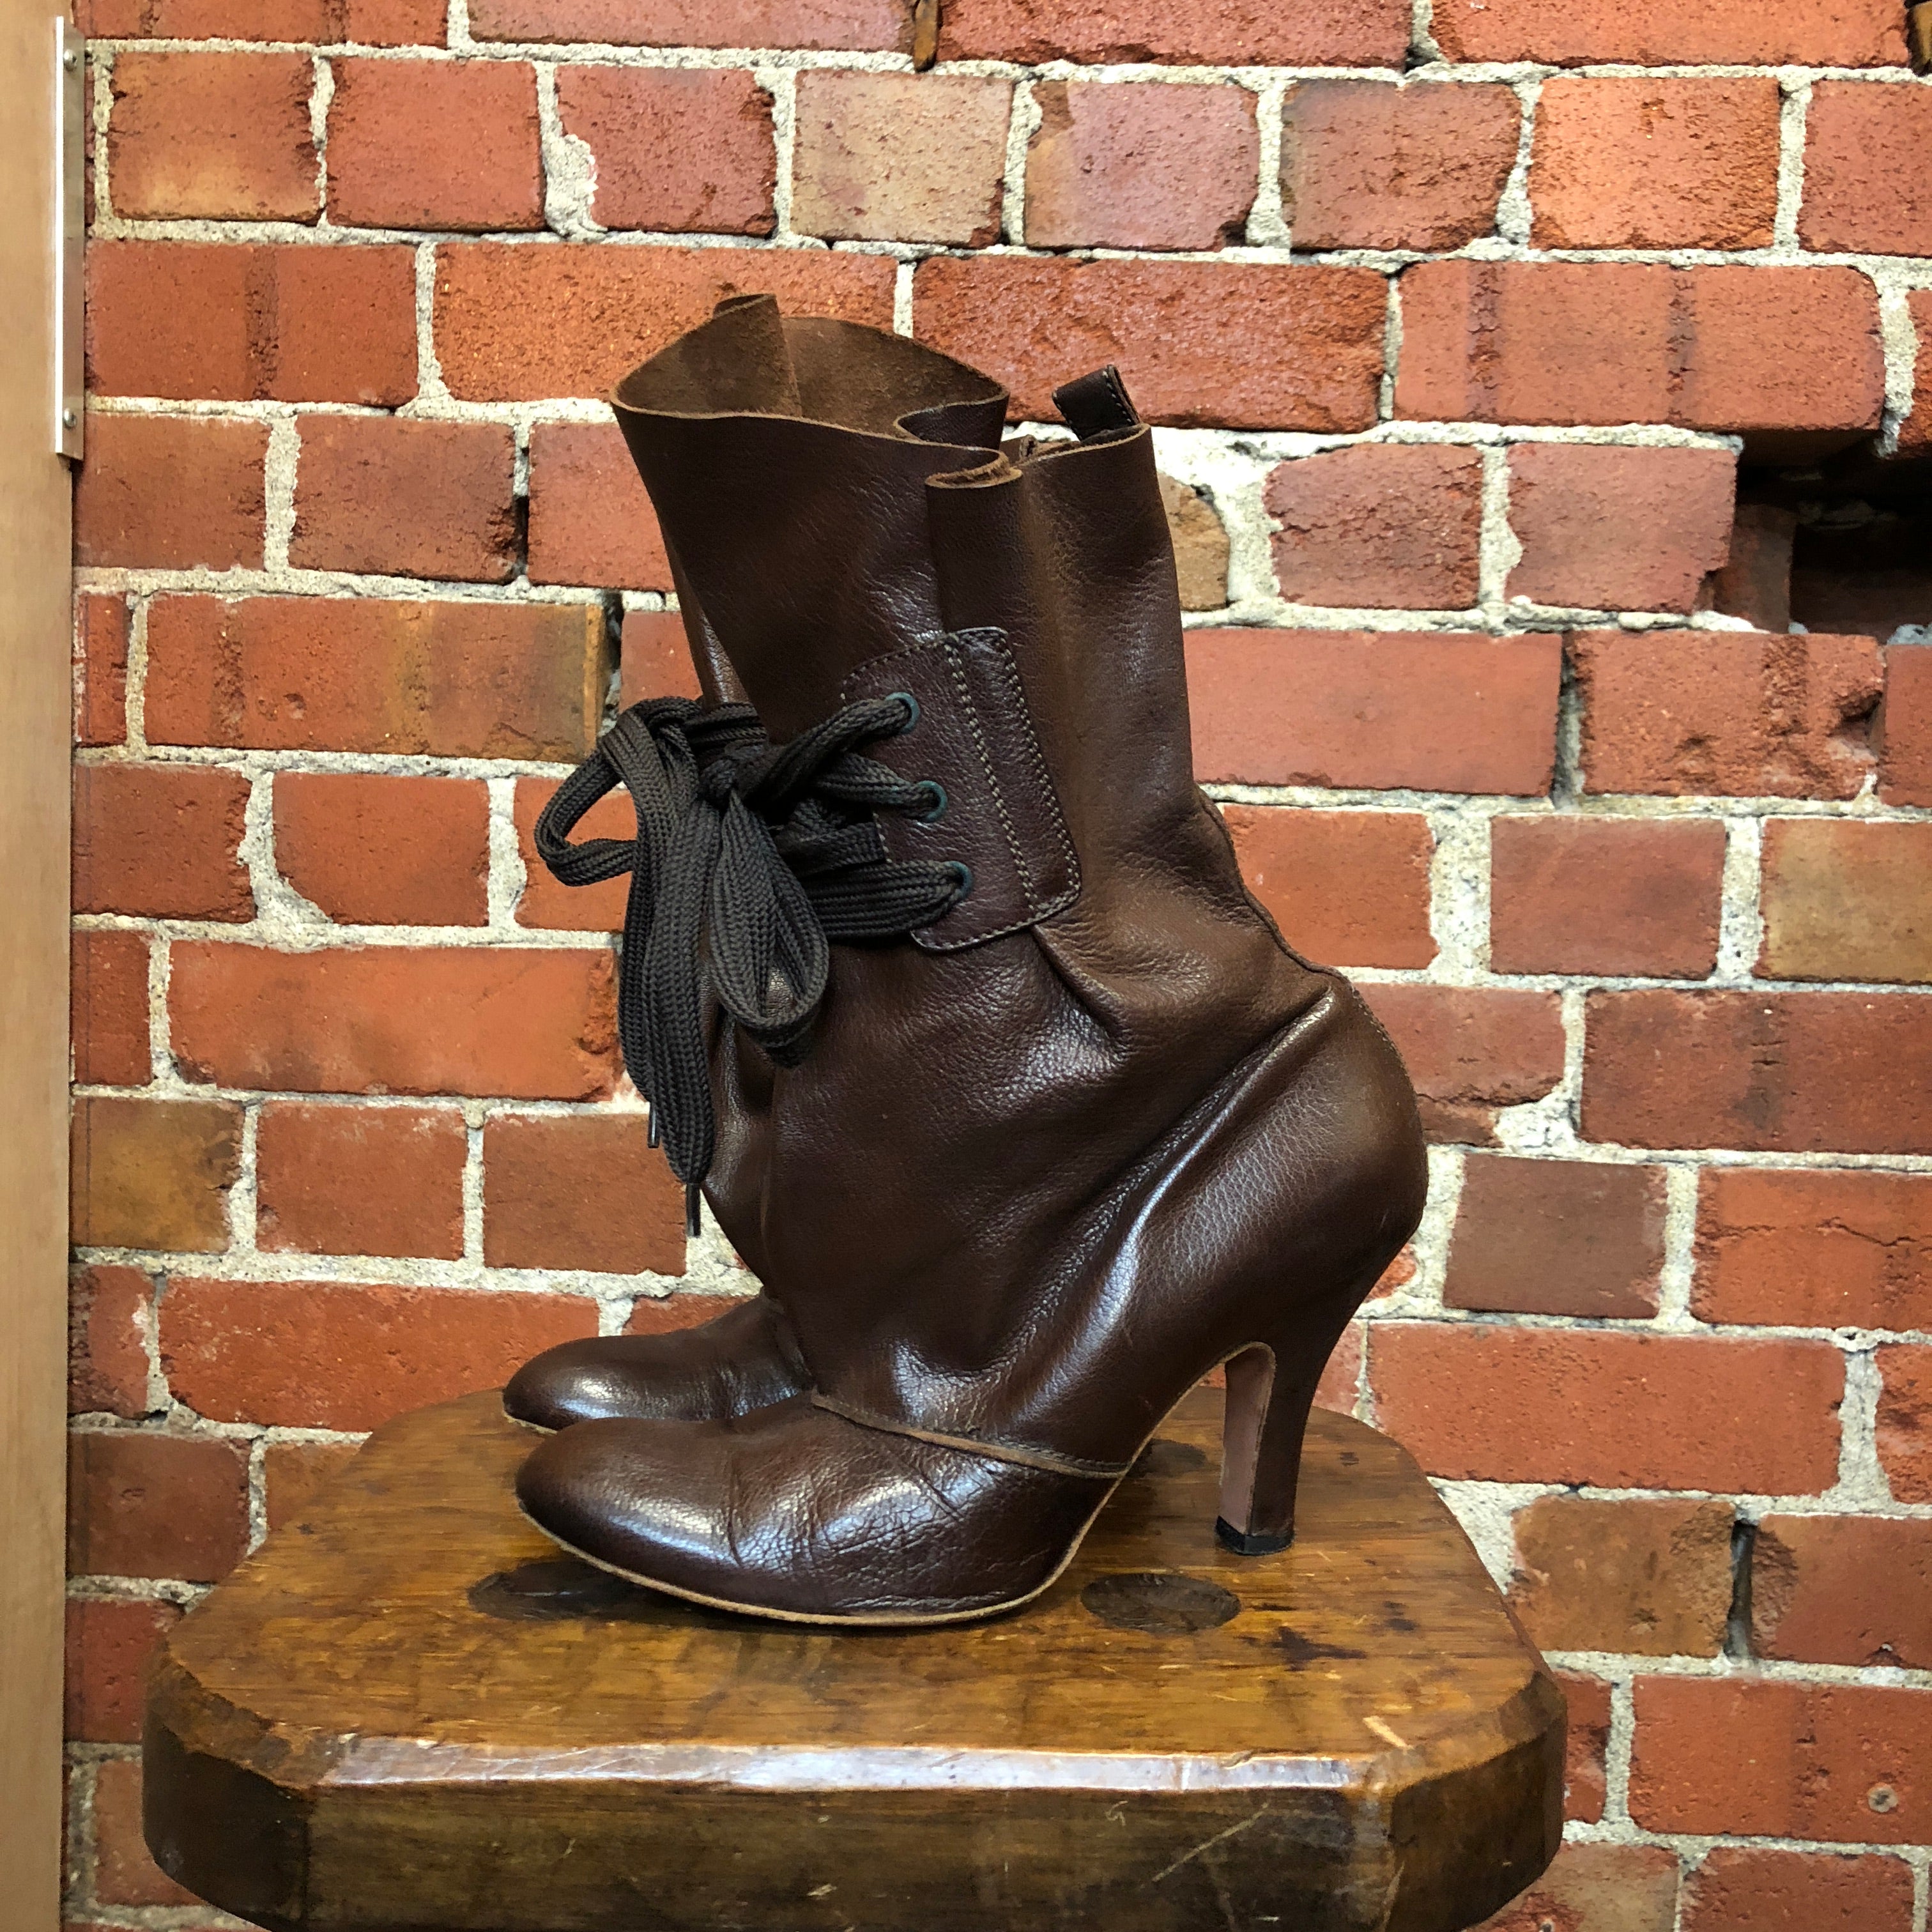 VIVIENNE WESTWOOD leather 'sack' boots 38